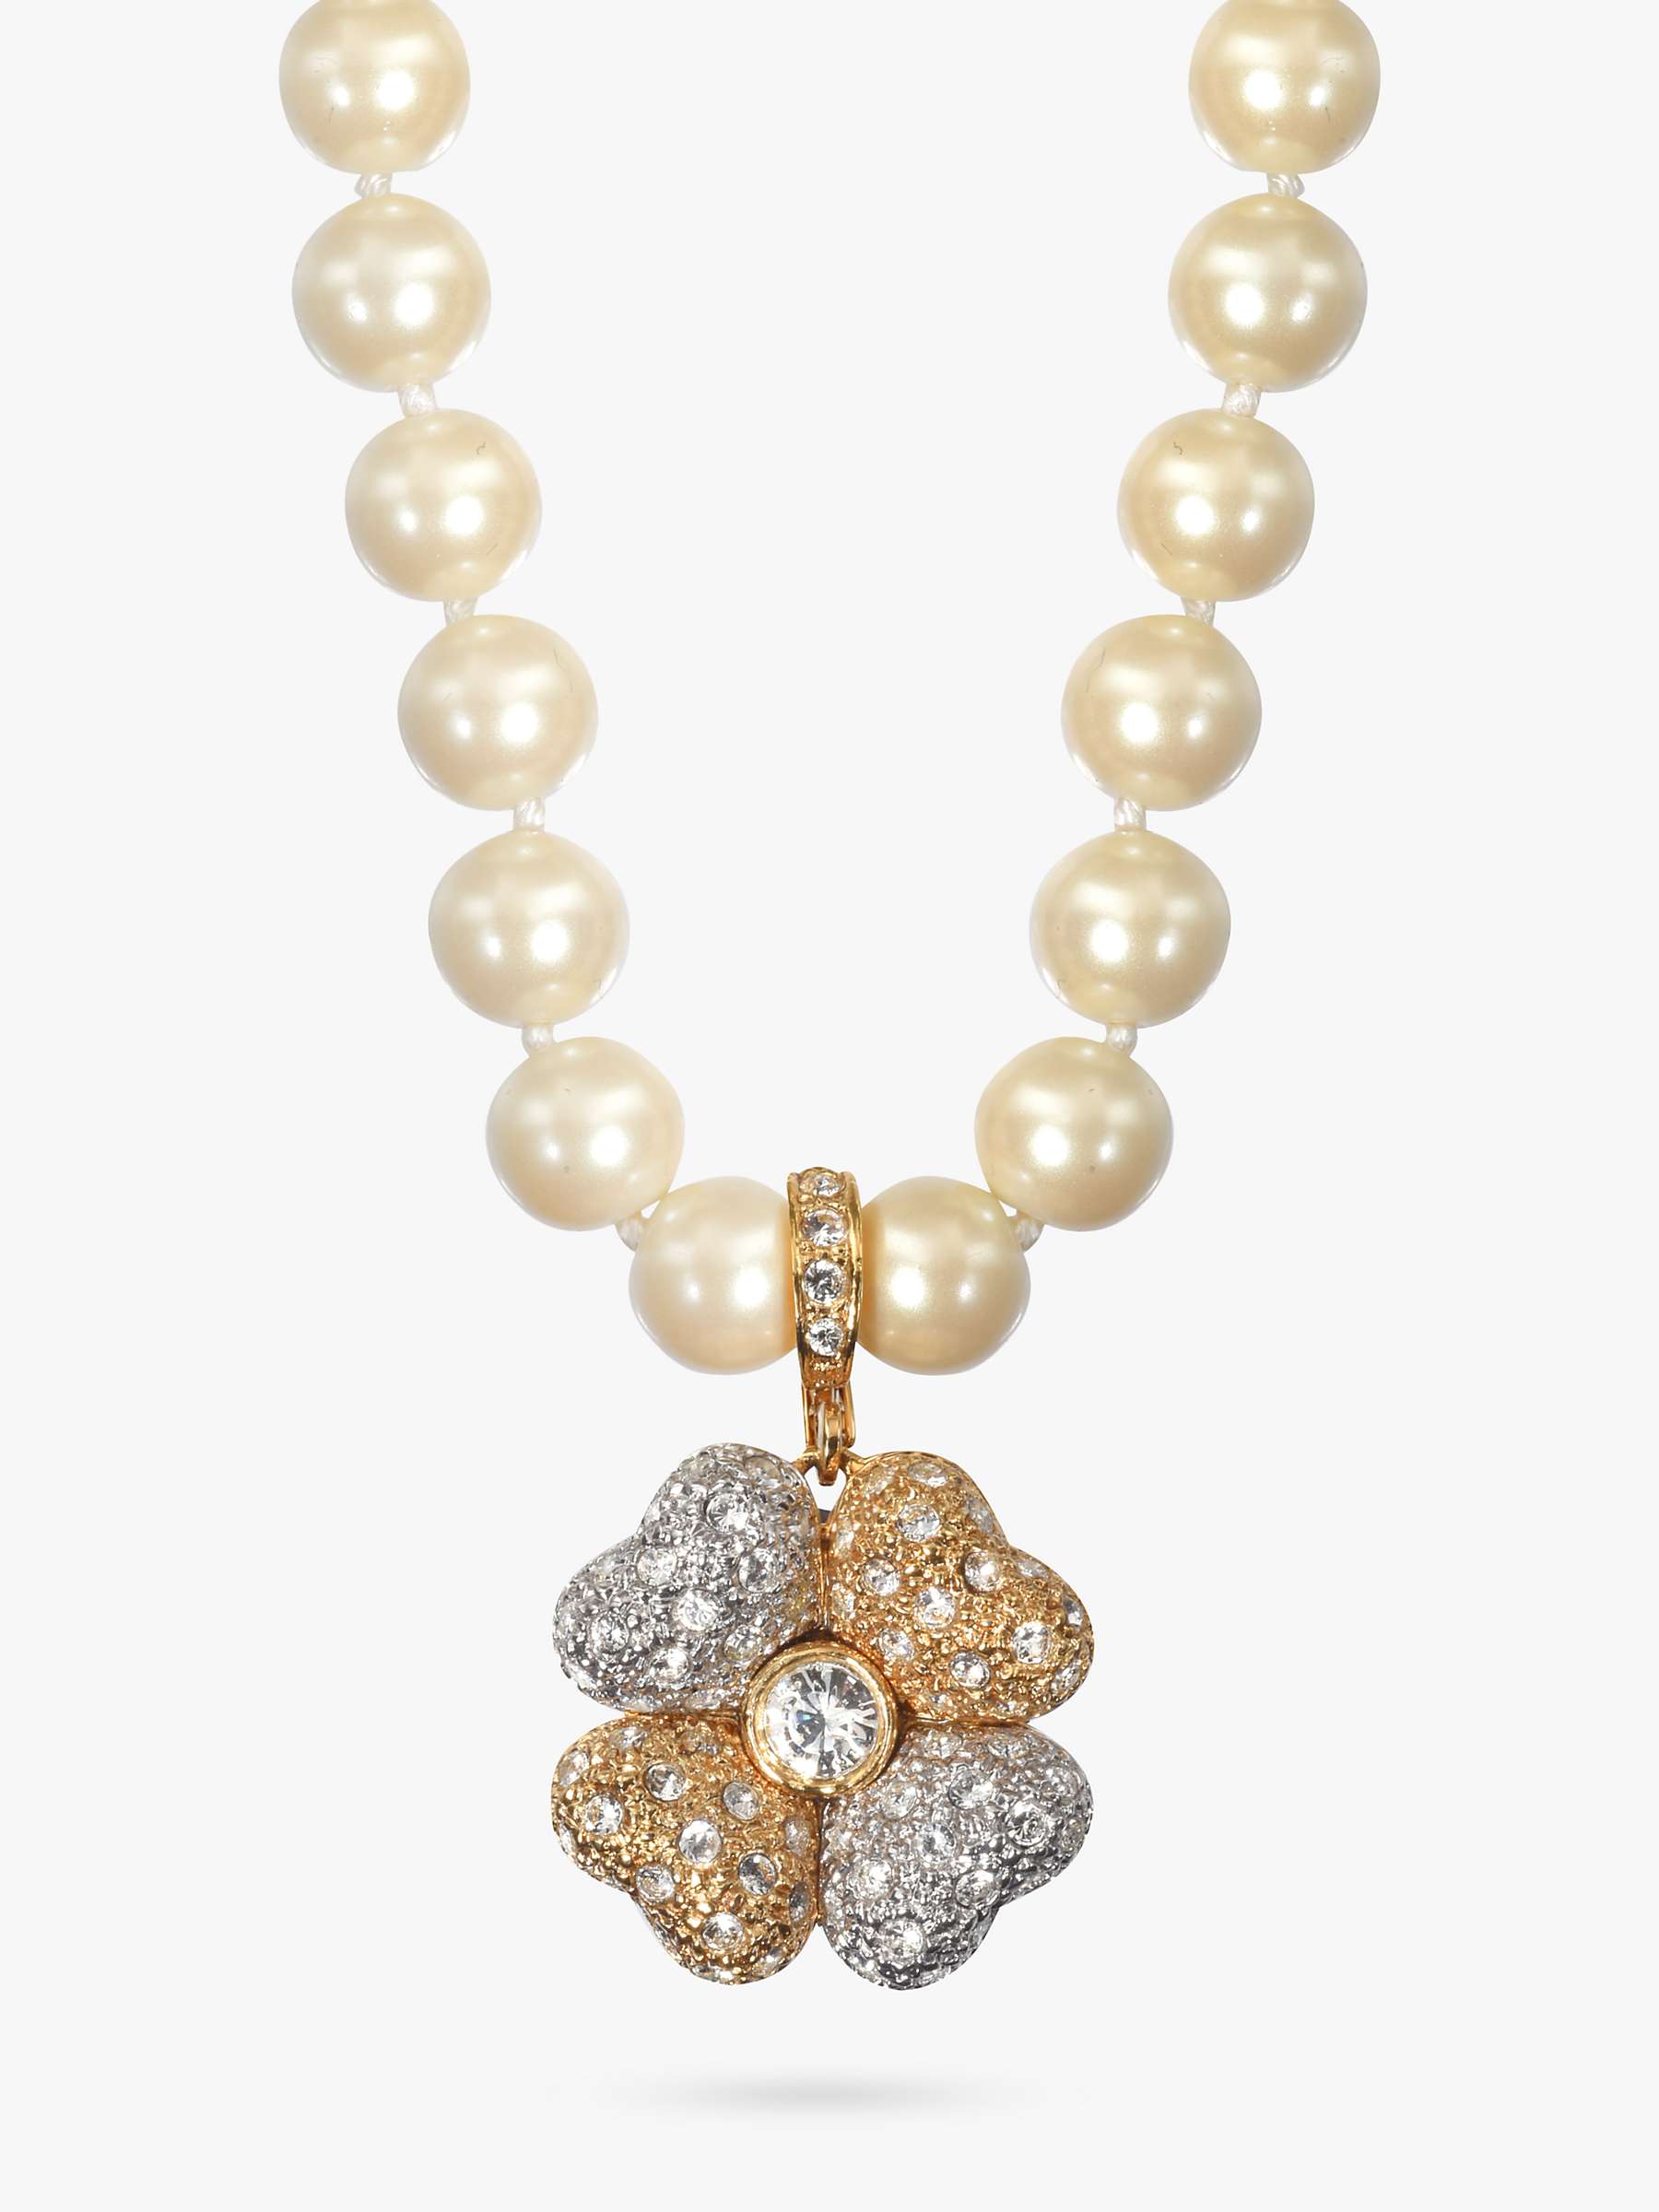 Buy Eclectica Vintage 18ct Gold Plated Faux Pearl and Swarovski Flower Beaded Necklace, Cream/Gold Online at johnlewis.com